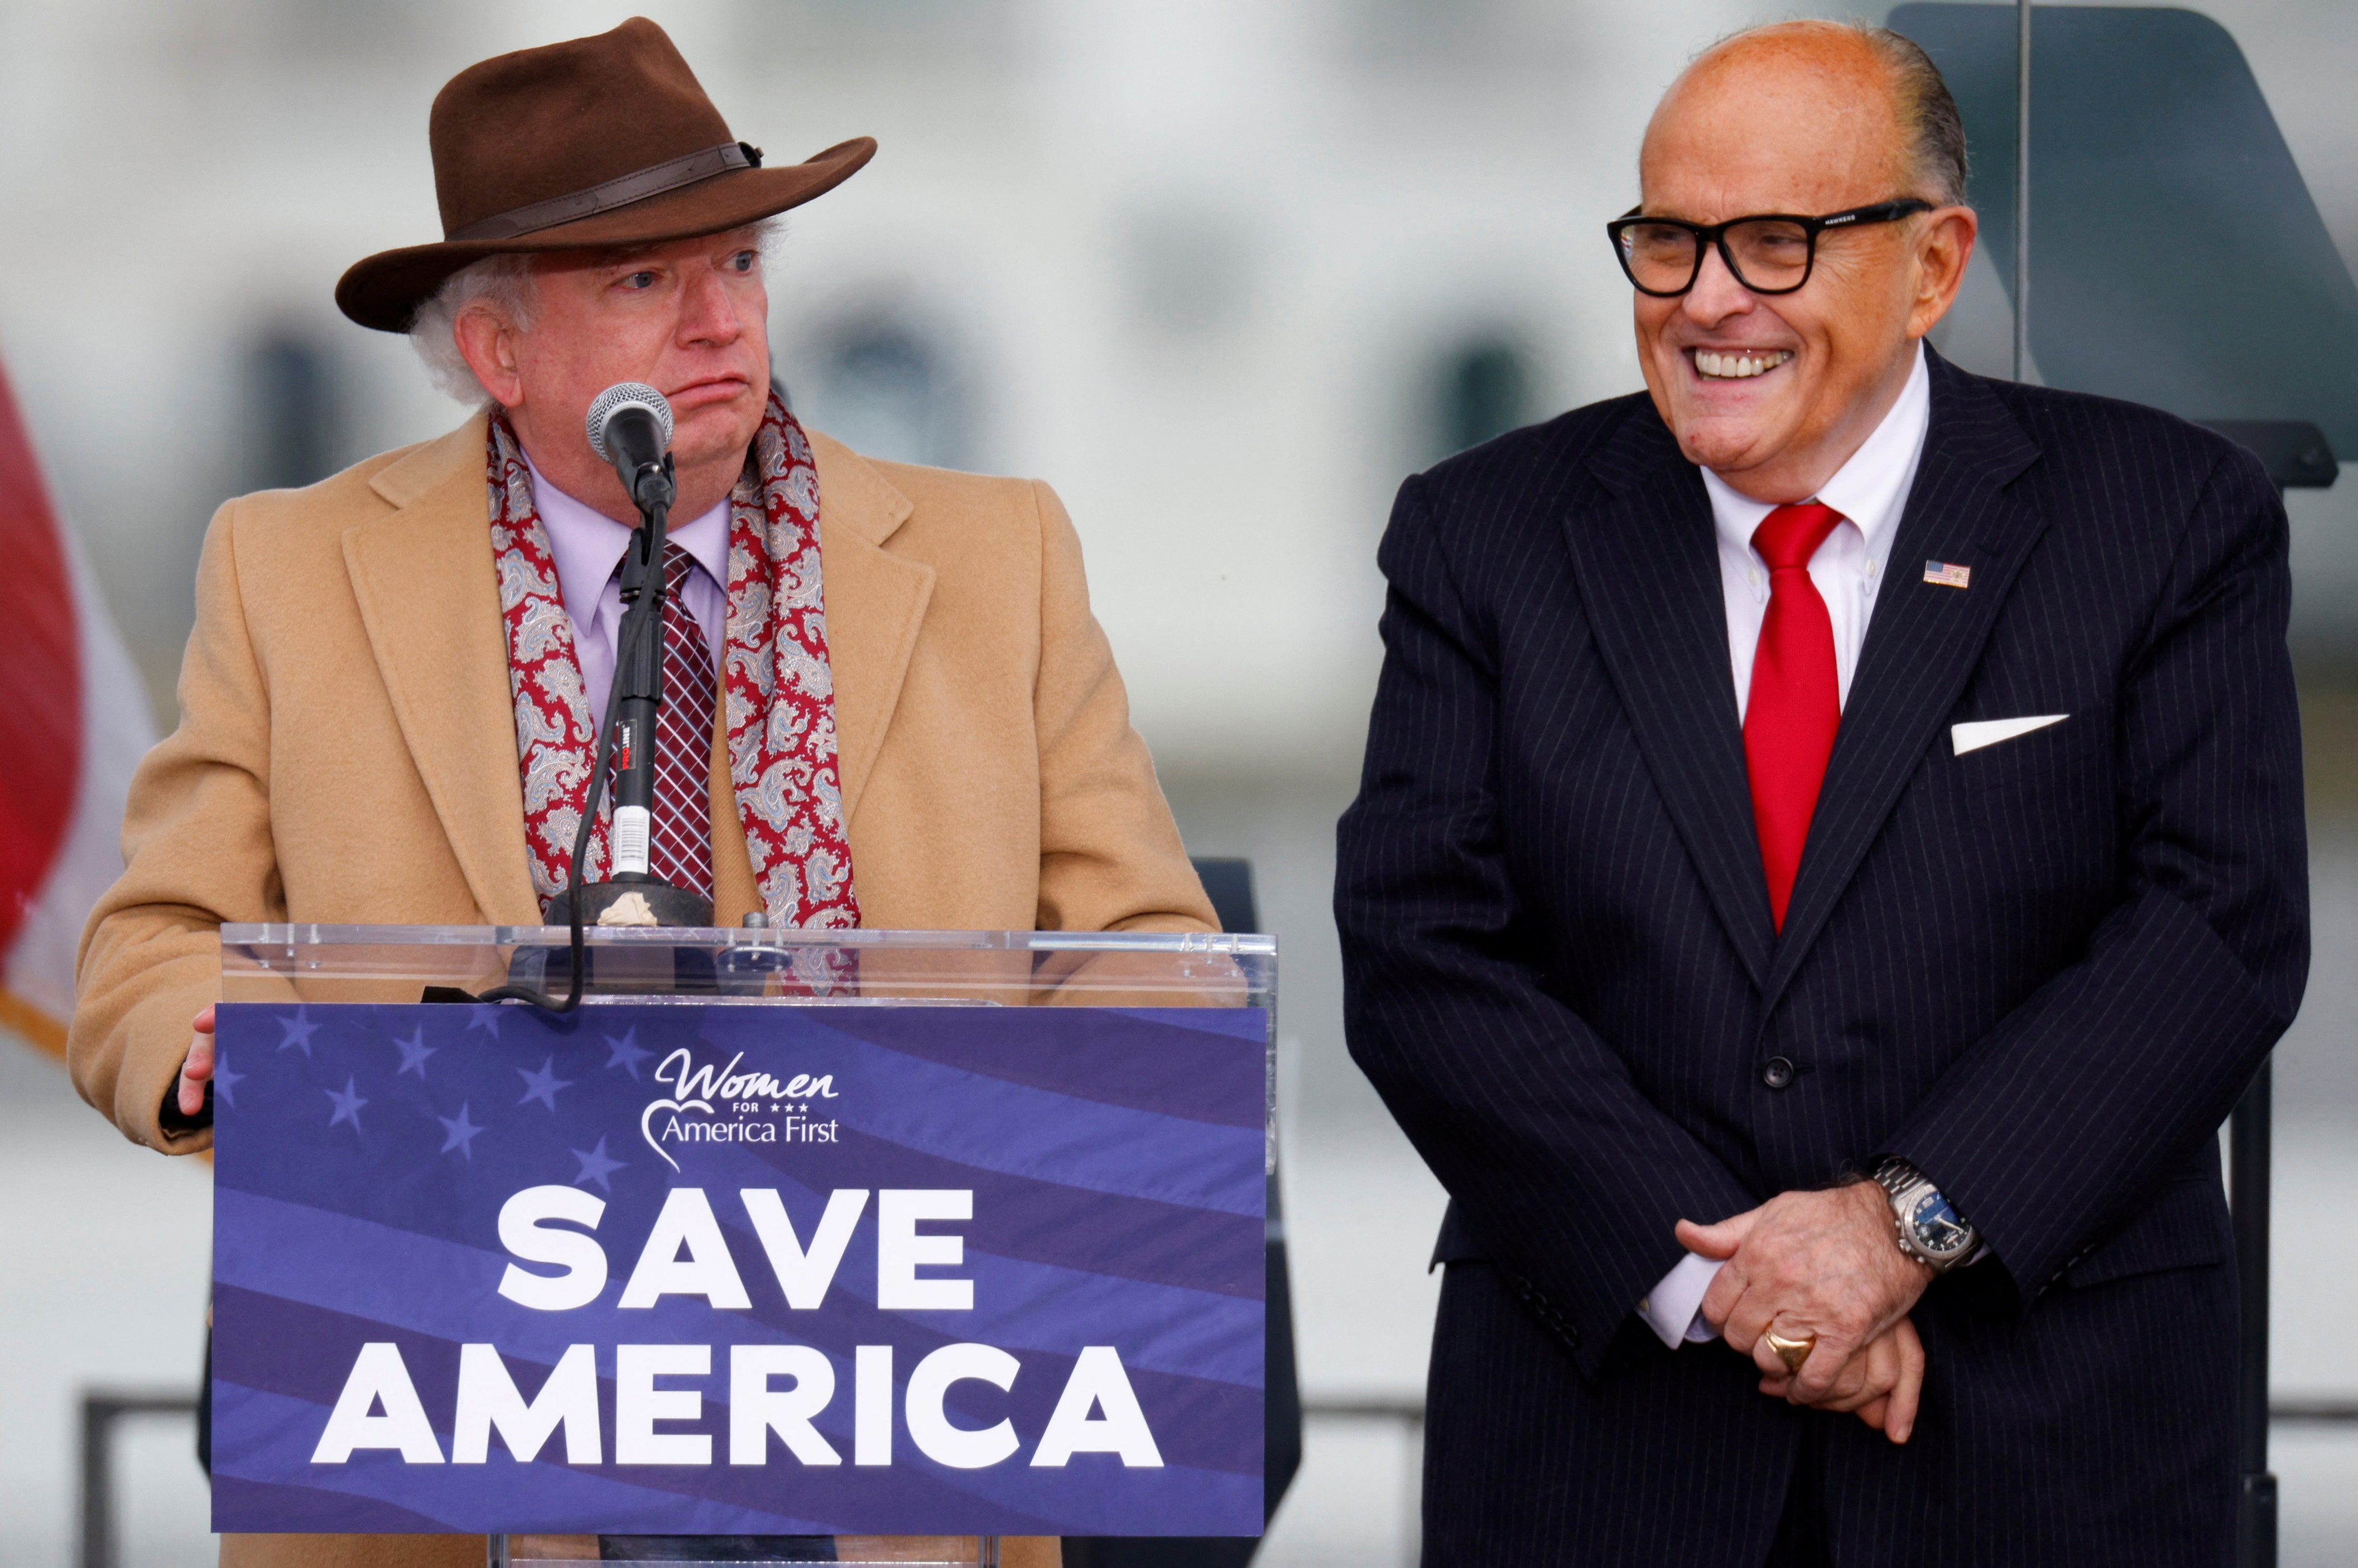 Former Trump attorneys John Eastman and Rudy Giuliani speak to the former president’s supporters in Washington, DC, on 6 January 2021.